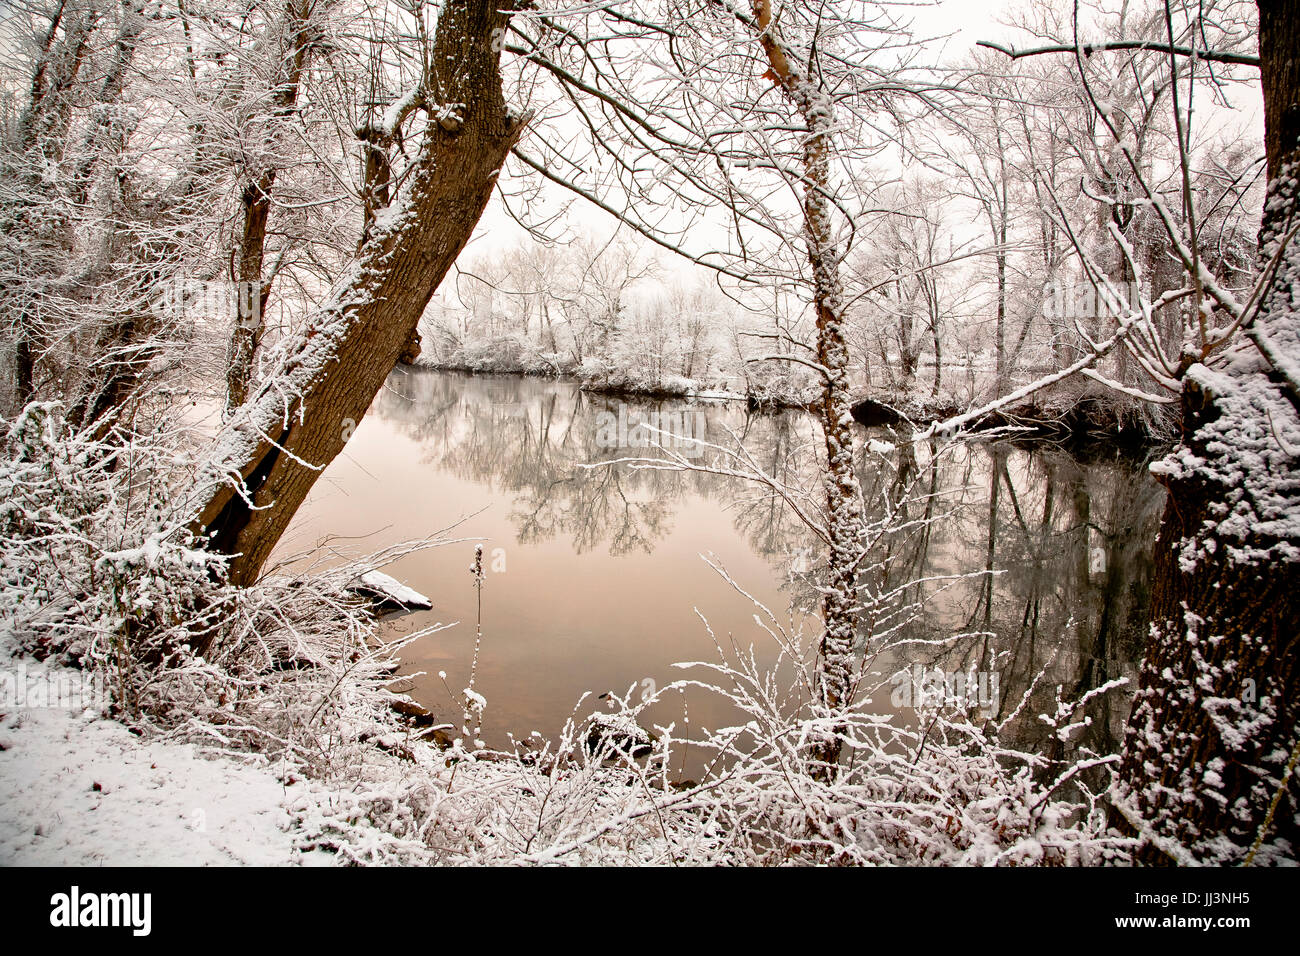 Riverbank snowy scenic view, trees reflect in water, tranquil, dreamy winter scene. Stock Photo